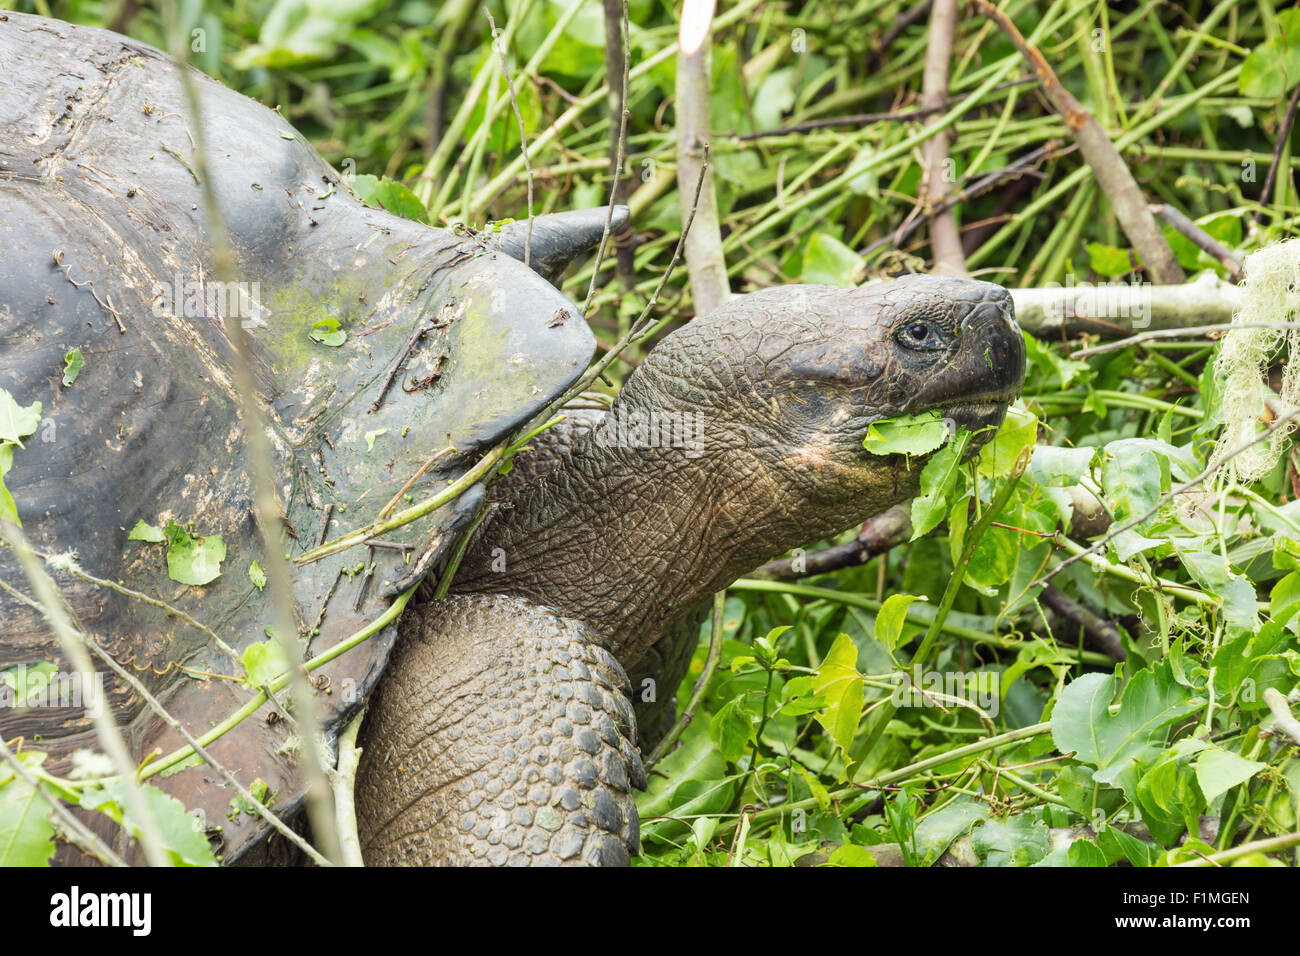 Closeup from the side of a giant Galapagos tortoise. Stock Photo